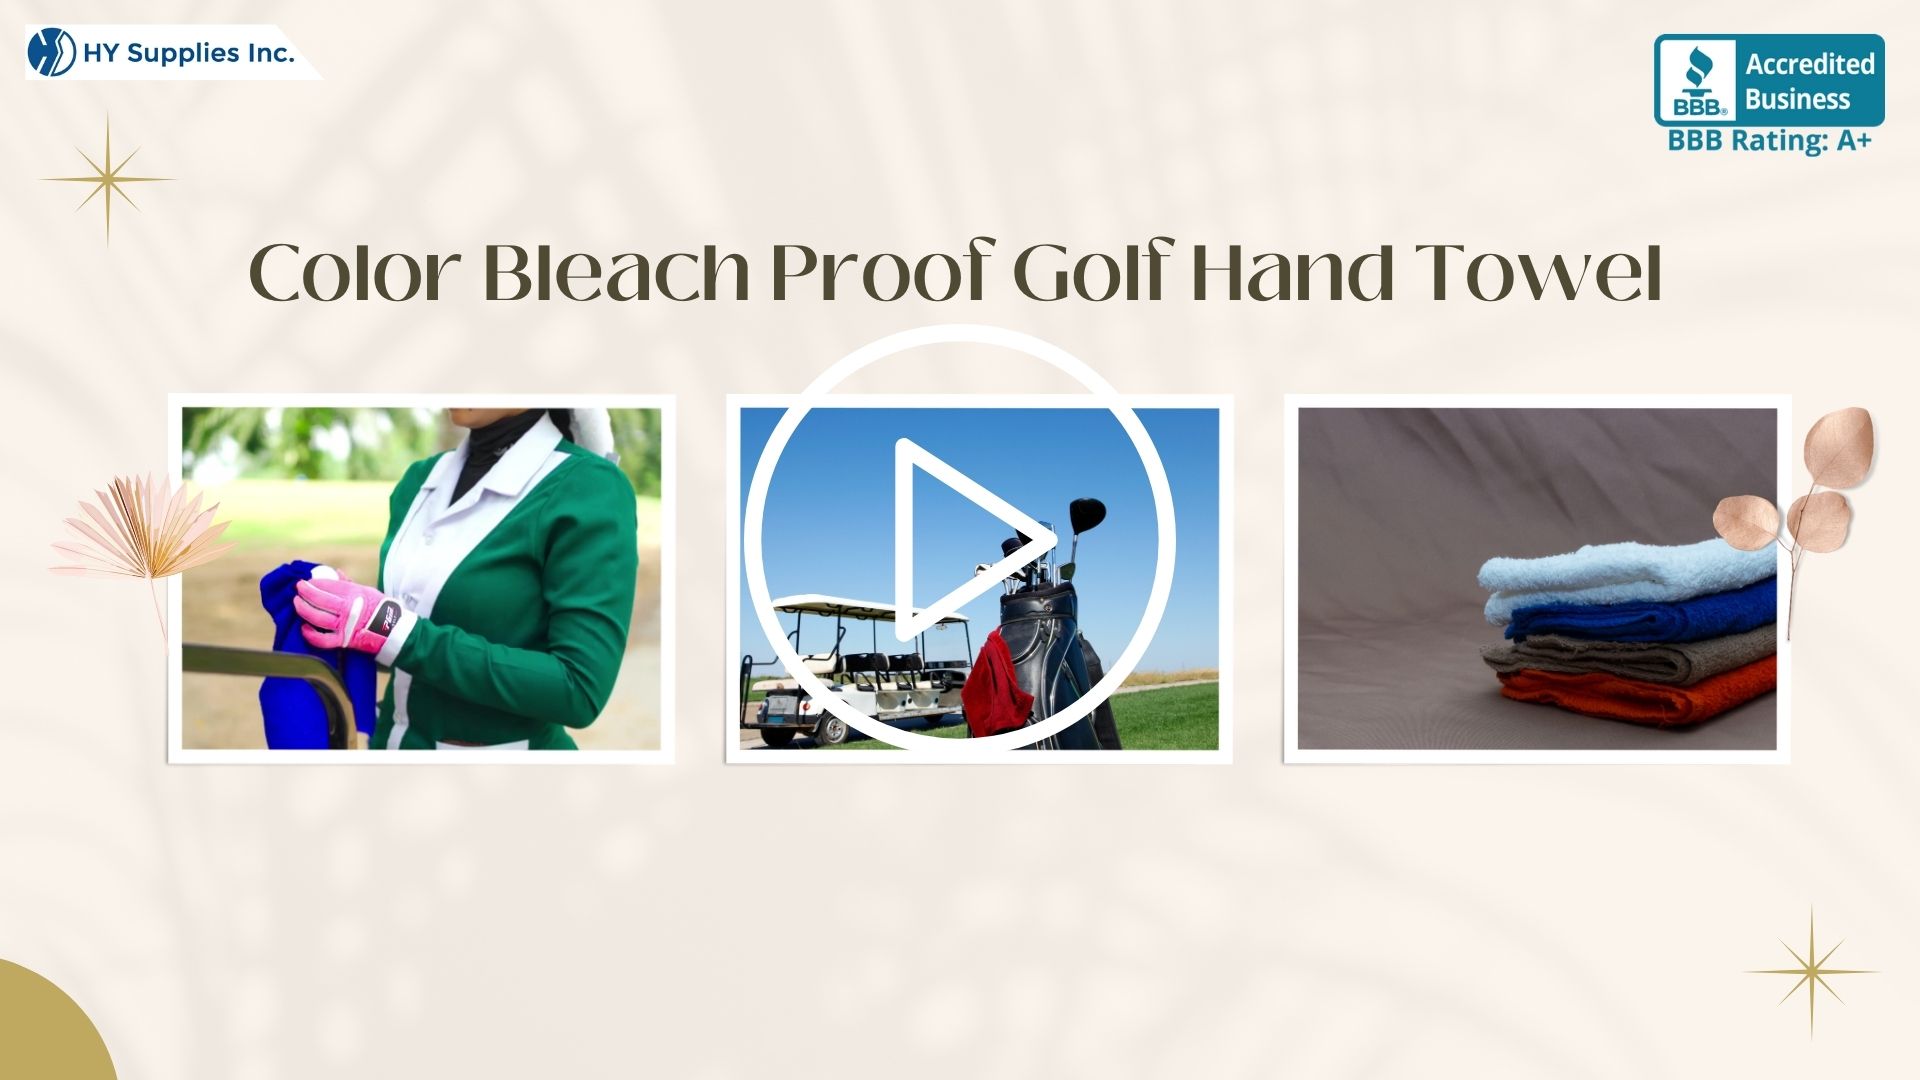 Color Bleach Proof Golf Hand Towel